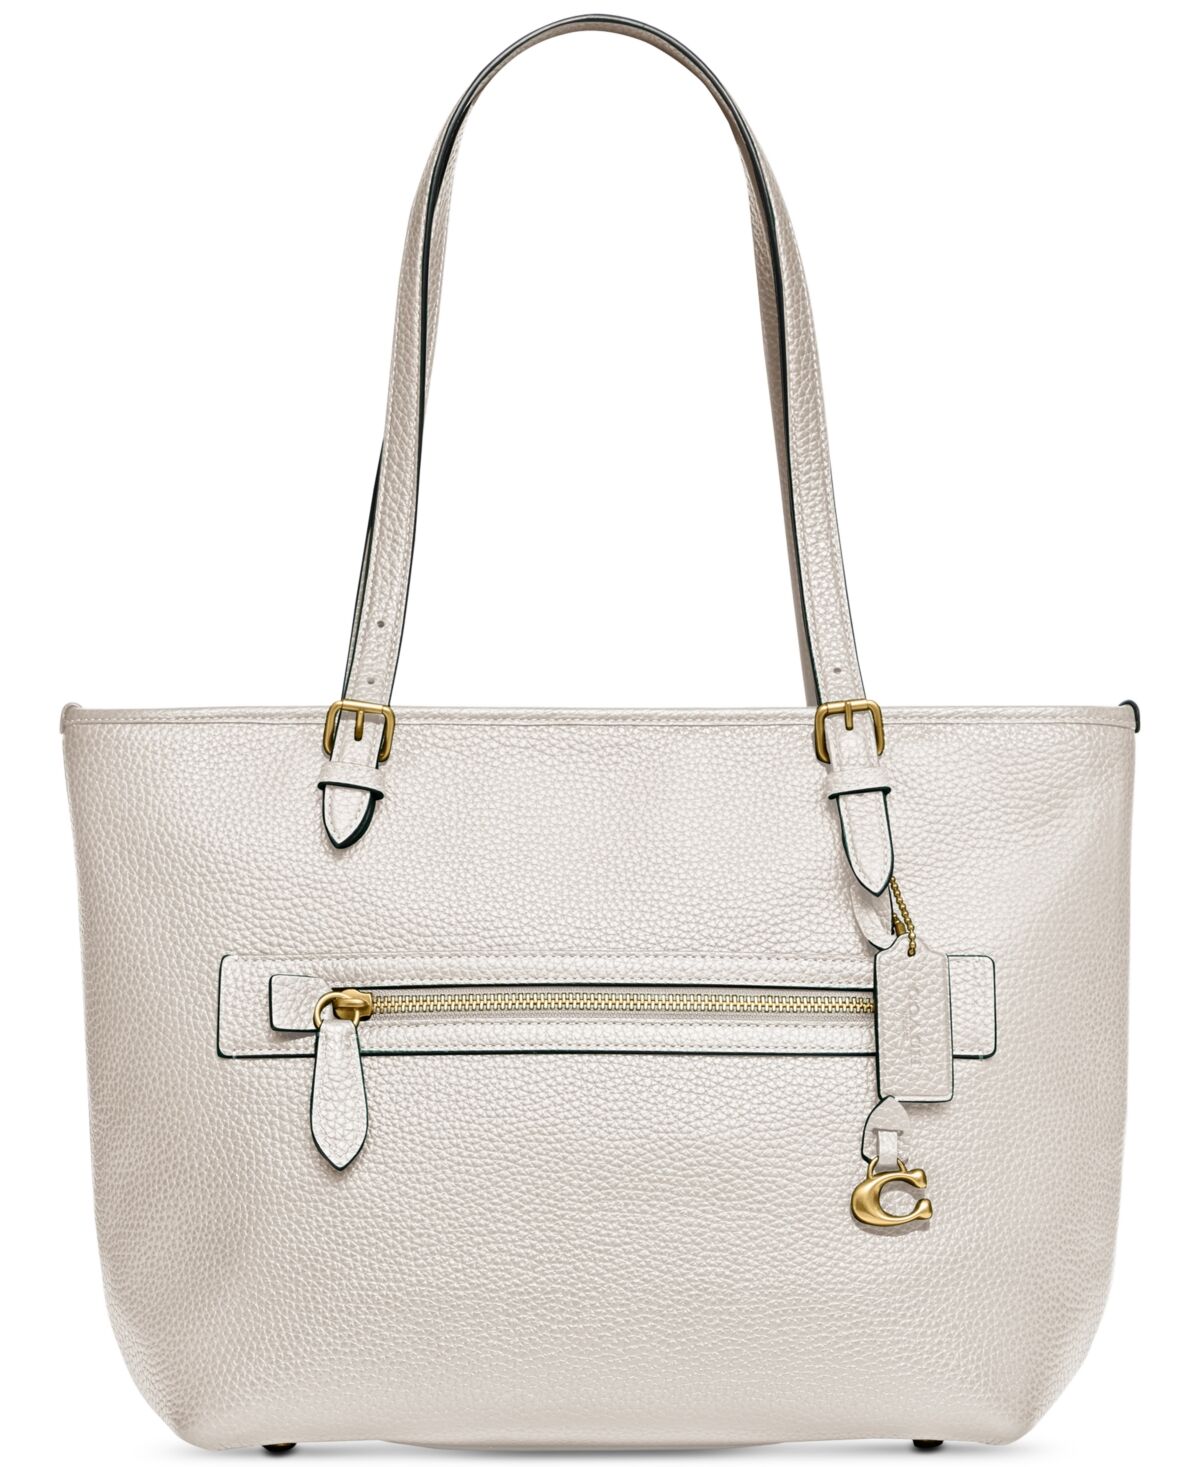 Coach Polished Pebble Leather Taylor Tote with C Dangle Charm - Chalk